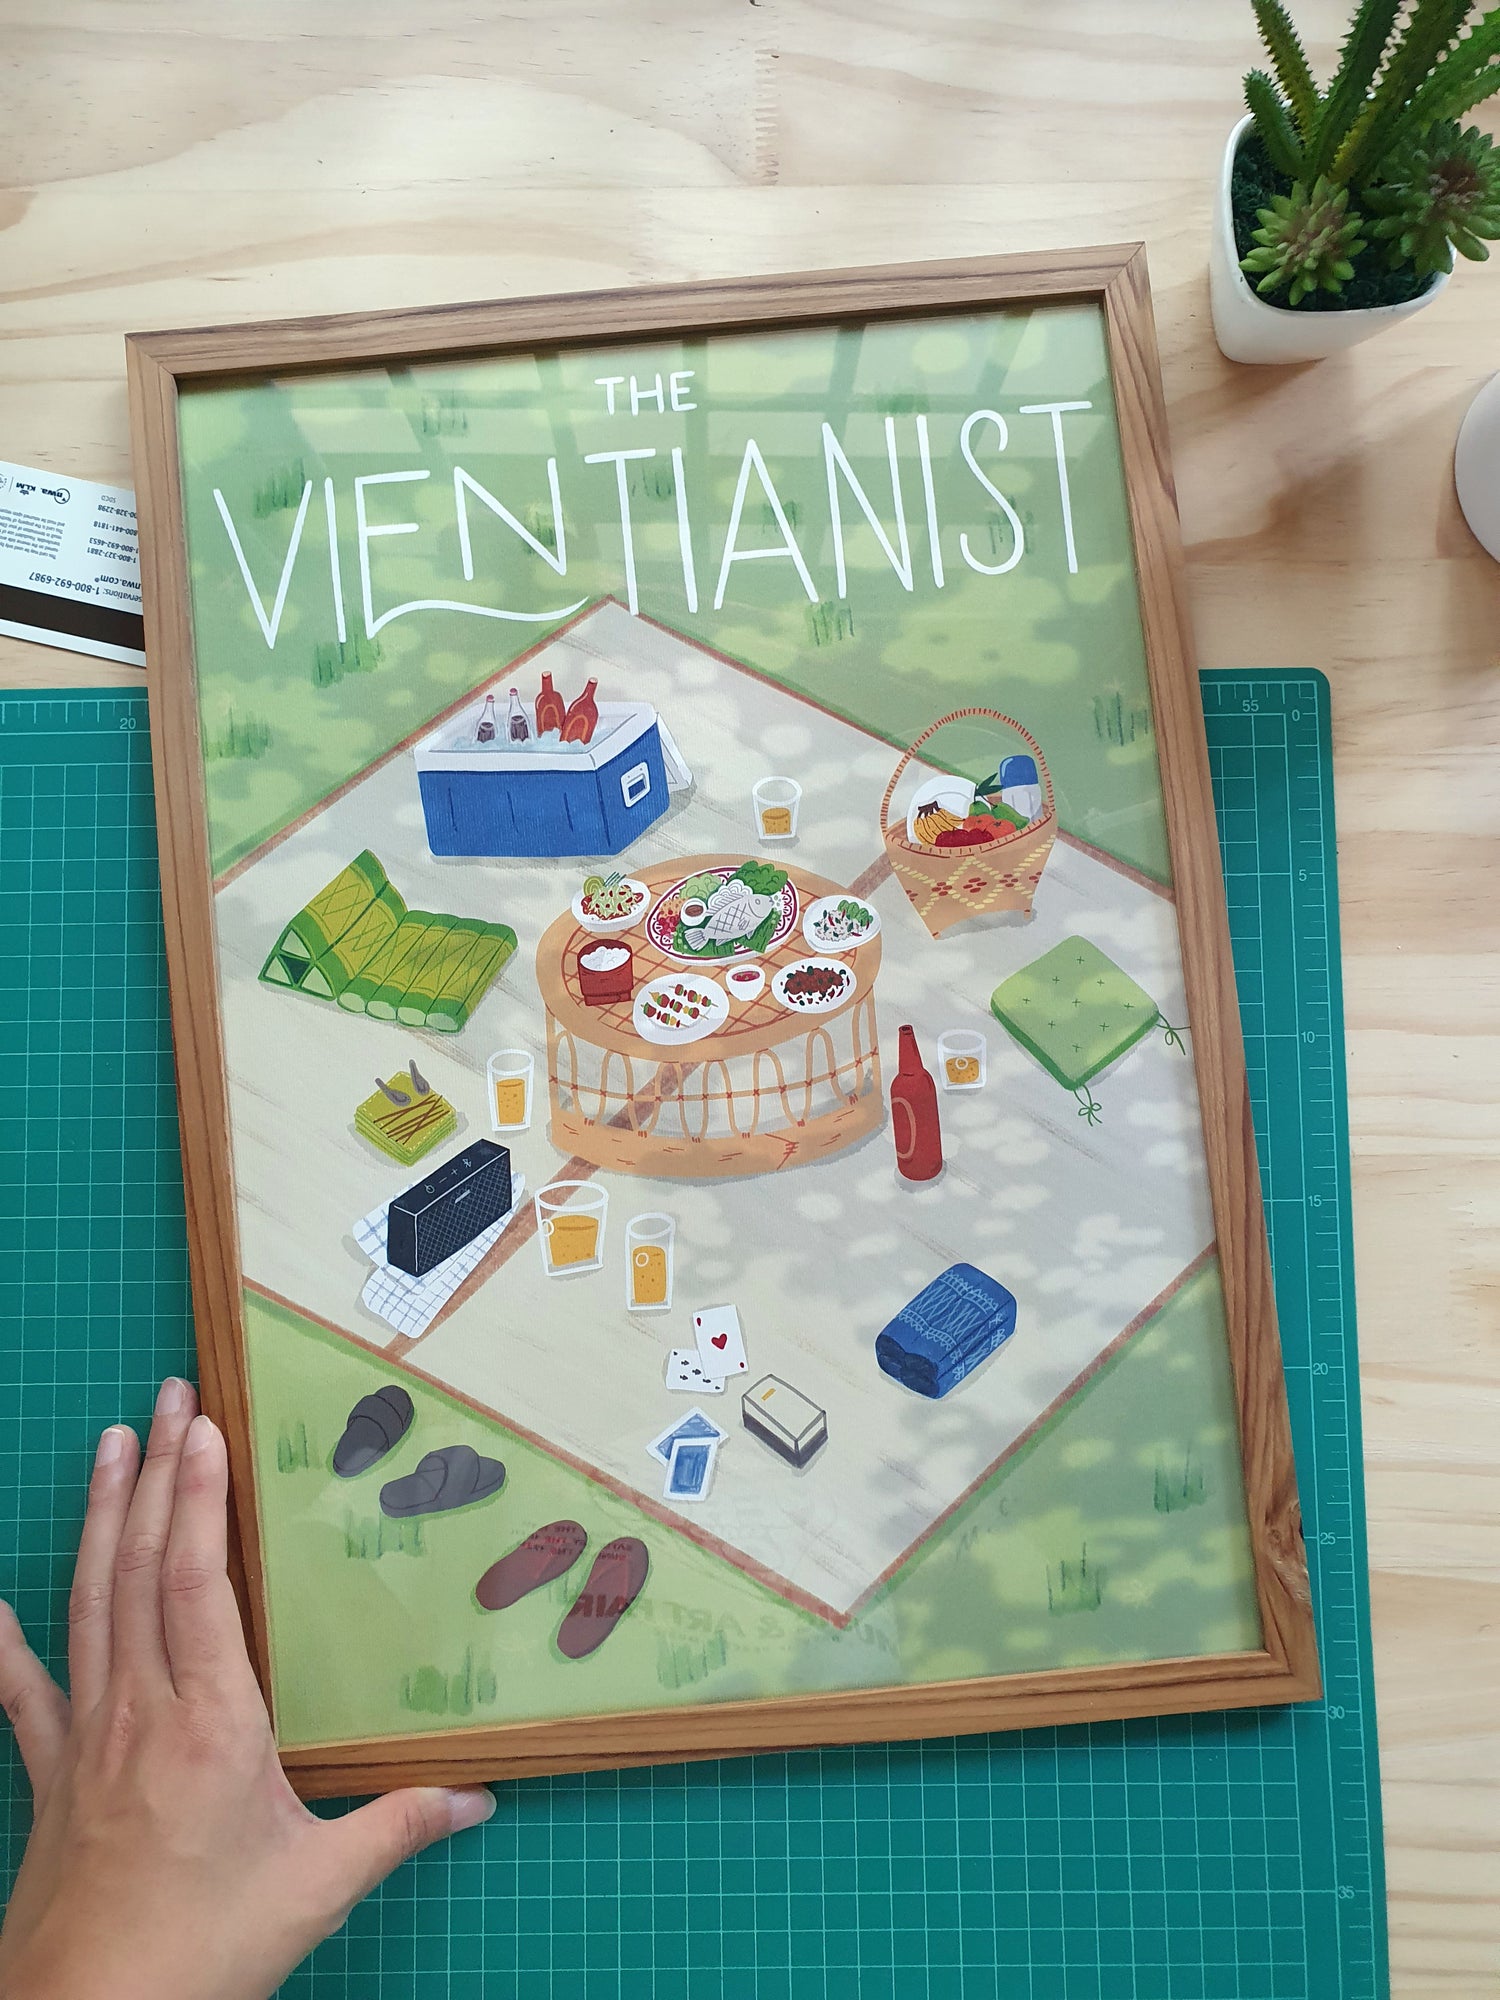 Illustration poster of a Lao picnic by The Vientianist in a frame on a table